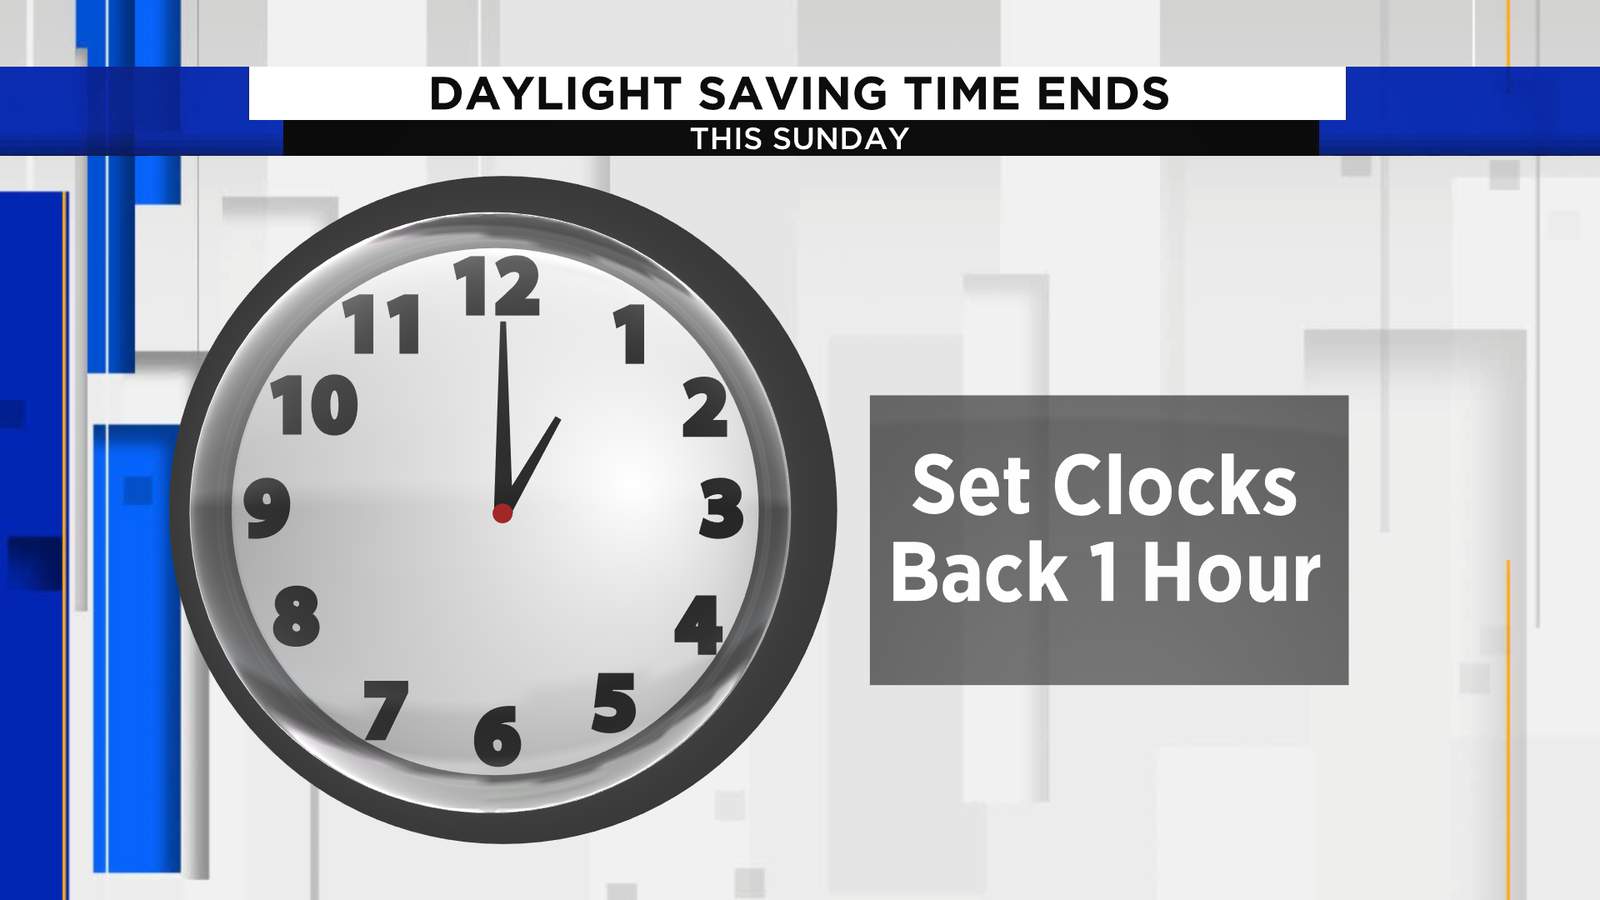 Love it or hate it, here are some pros, cons of Daylight Saving Time